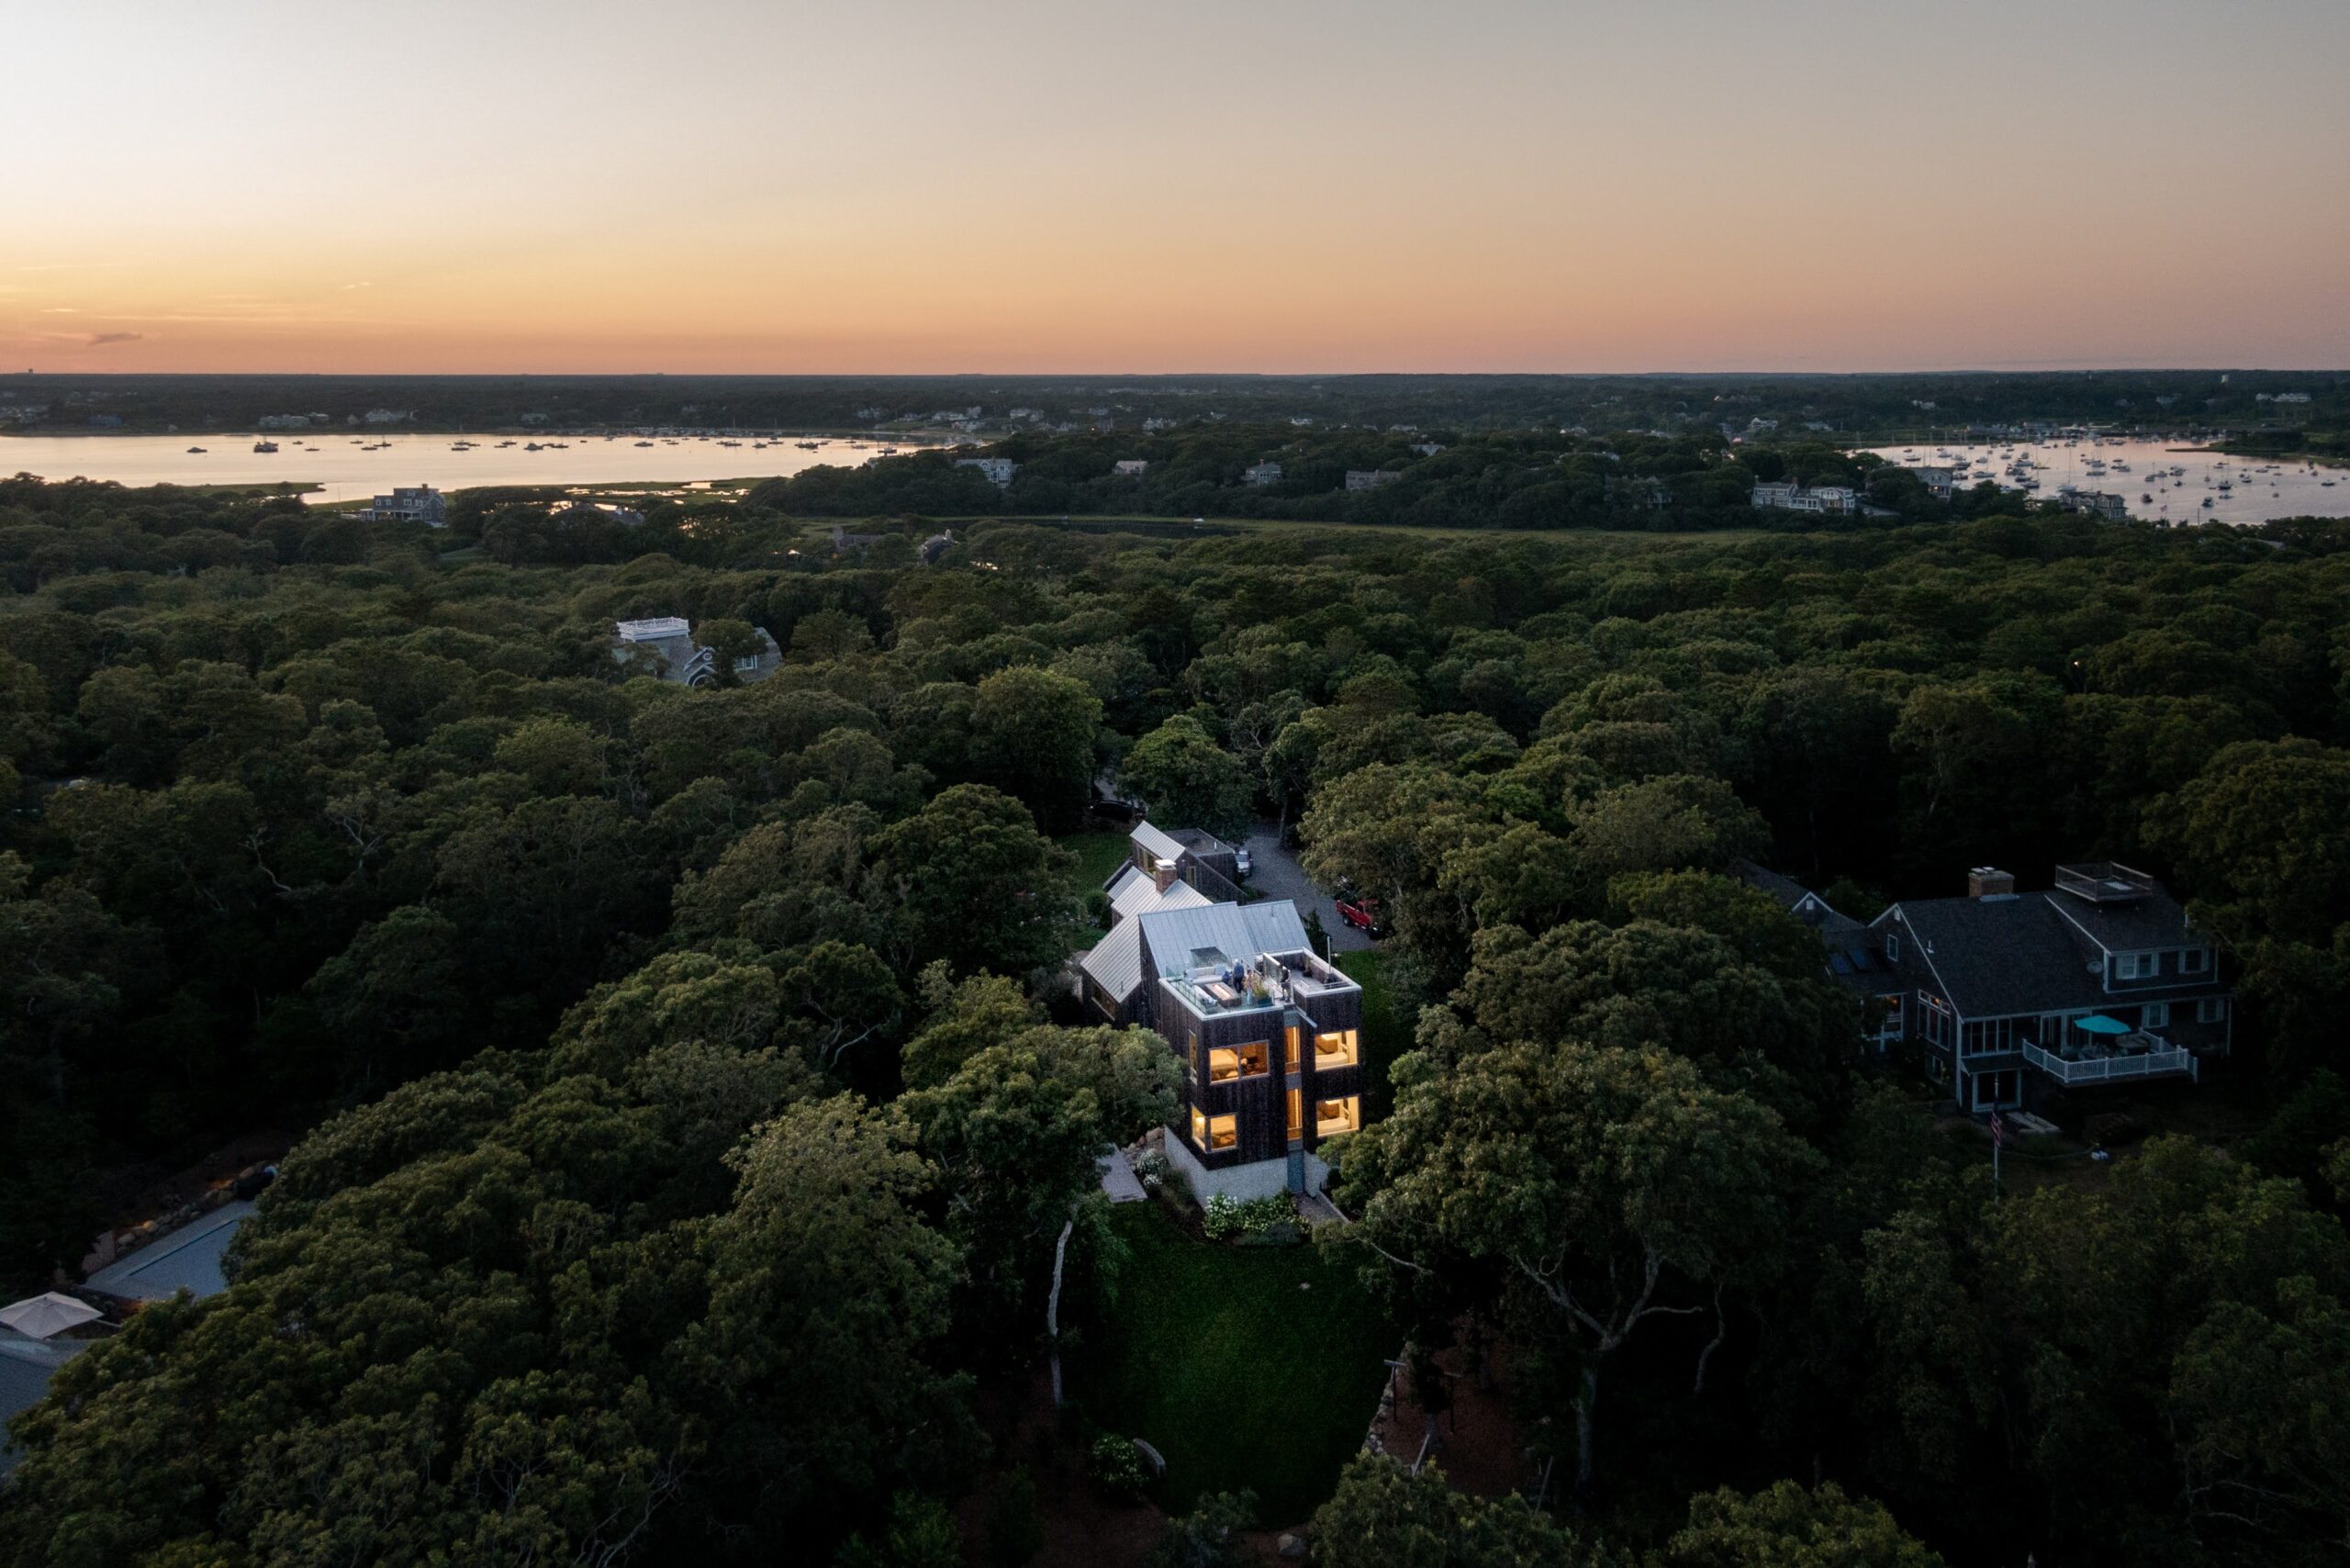 Arial view of the wooded area surrounding the warm windows during a beautiful sunset at Morris Island Residence on Morris Island in Chatham, Massachusetts featuring Kebony Modified Wood Clear Cladding